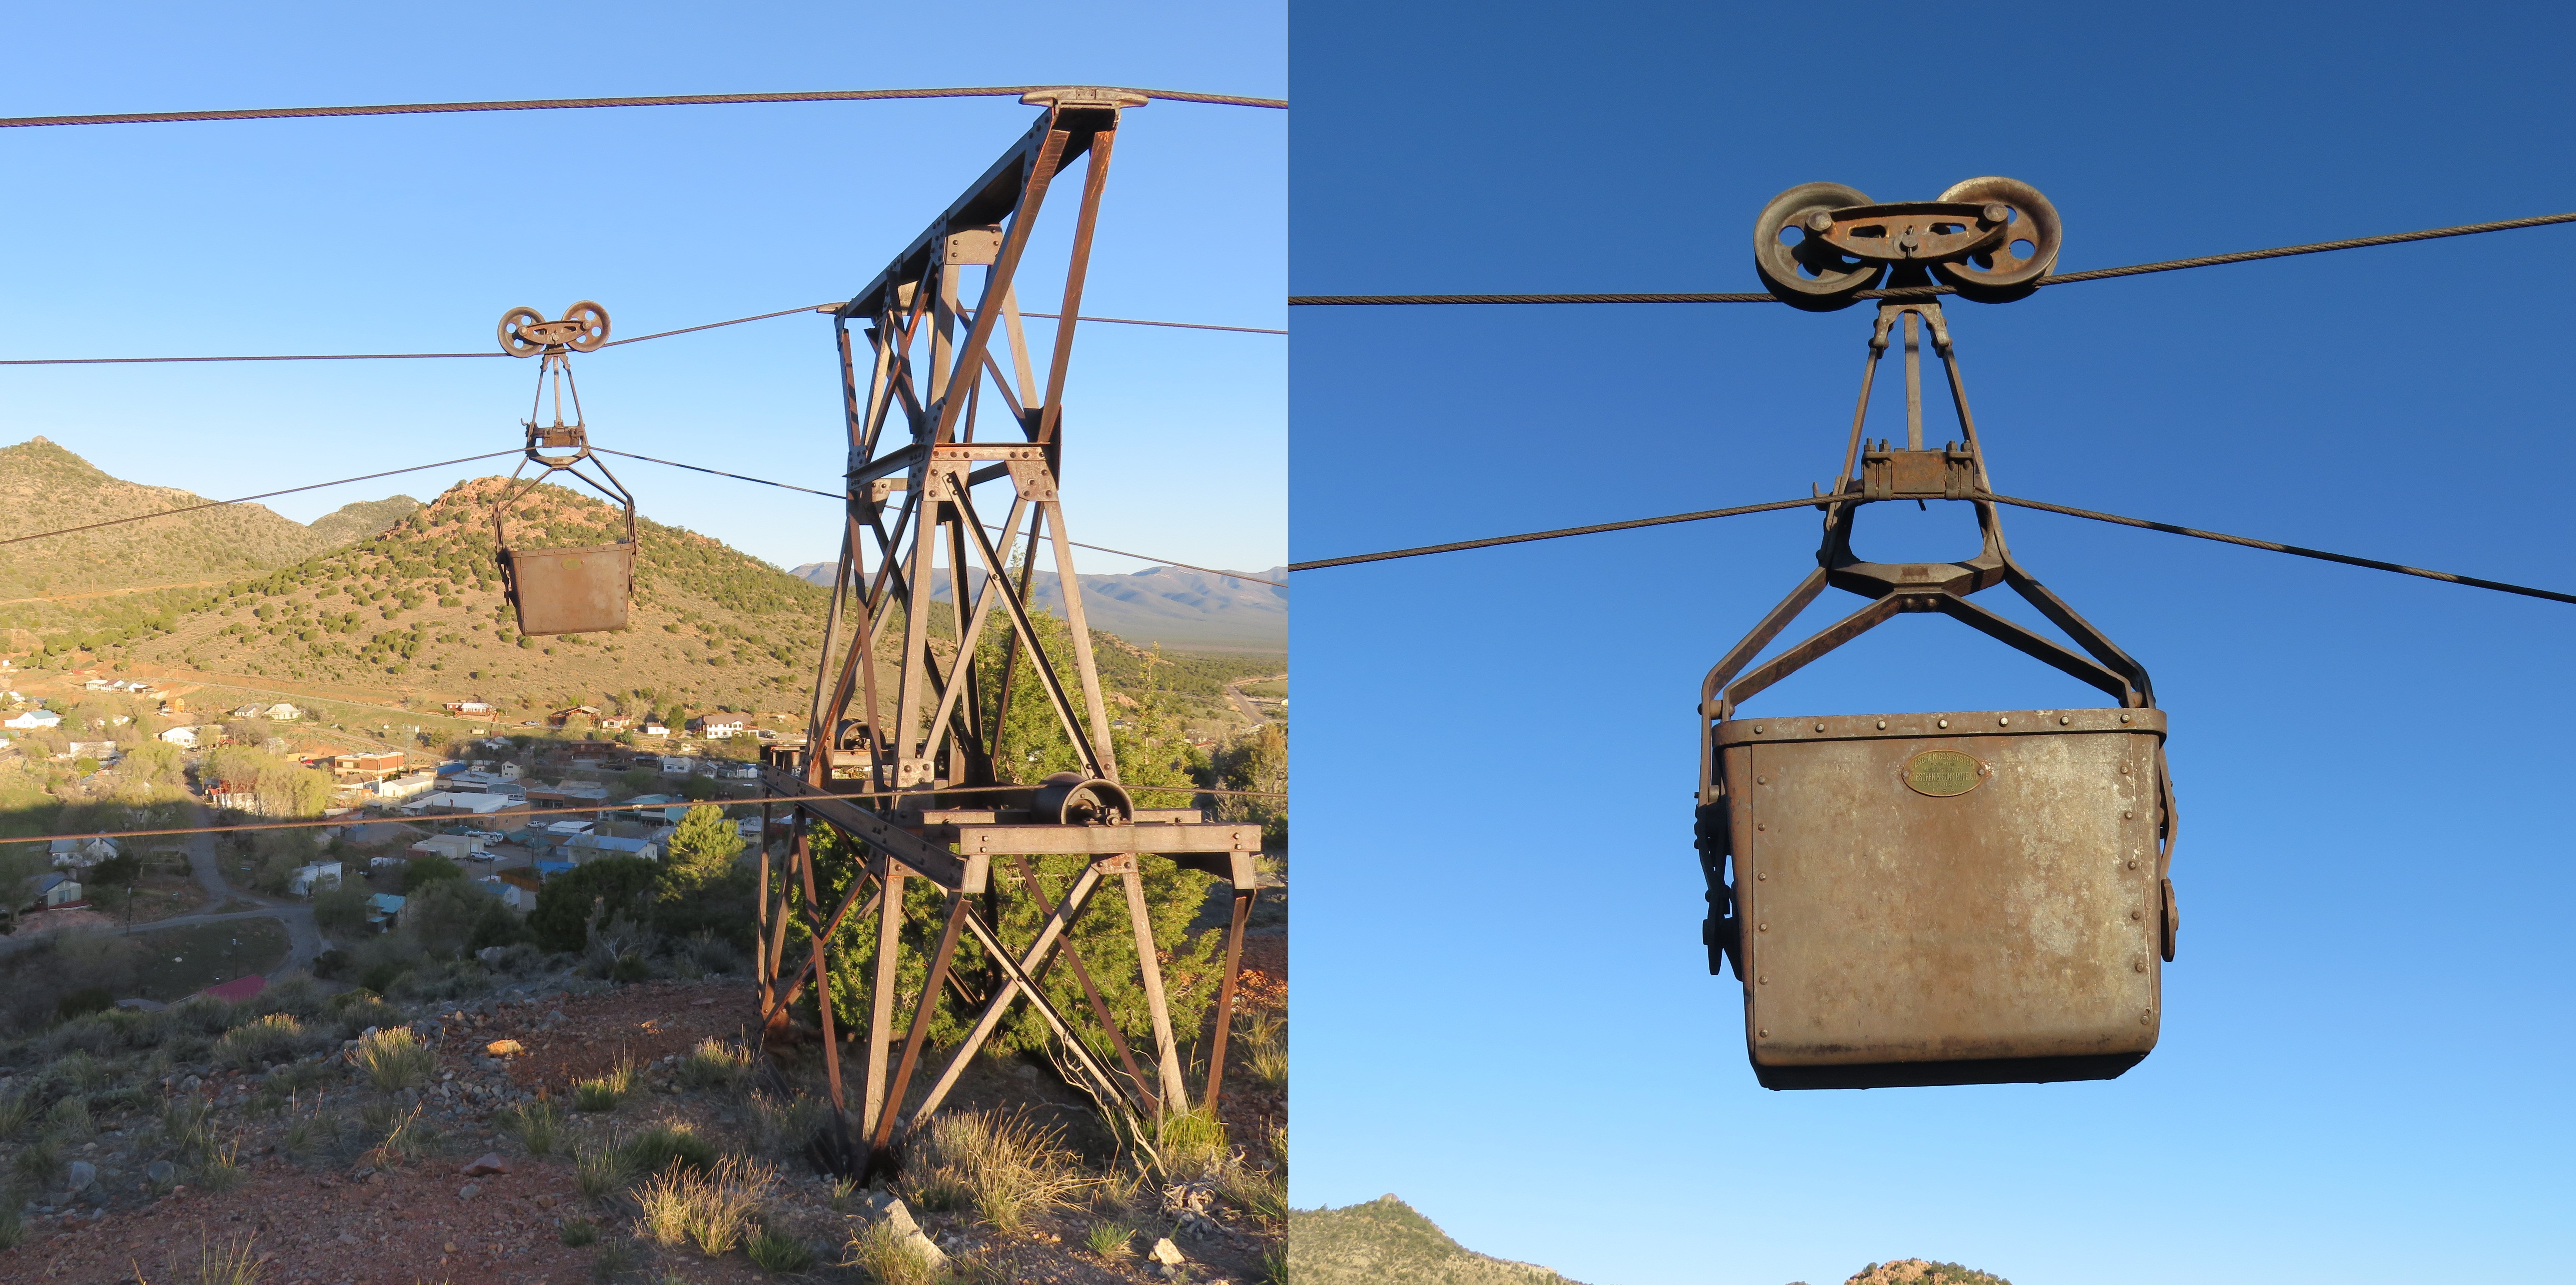 Ore aerial tramway and ore bucket system was built in 1920 and operated until the early 1930s in Pioche, Lincoln County, NV.